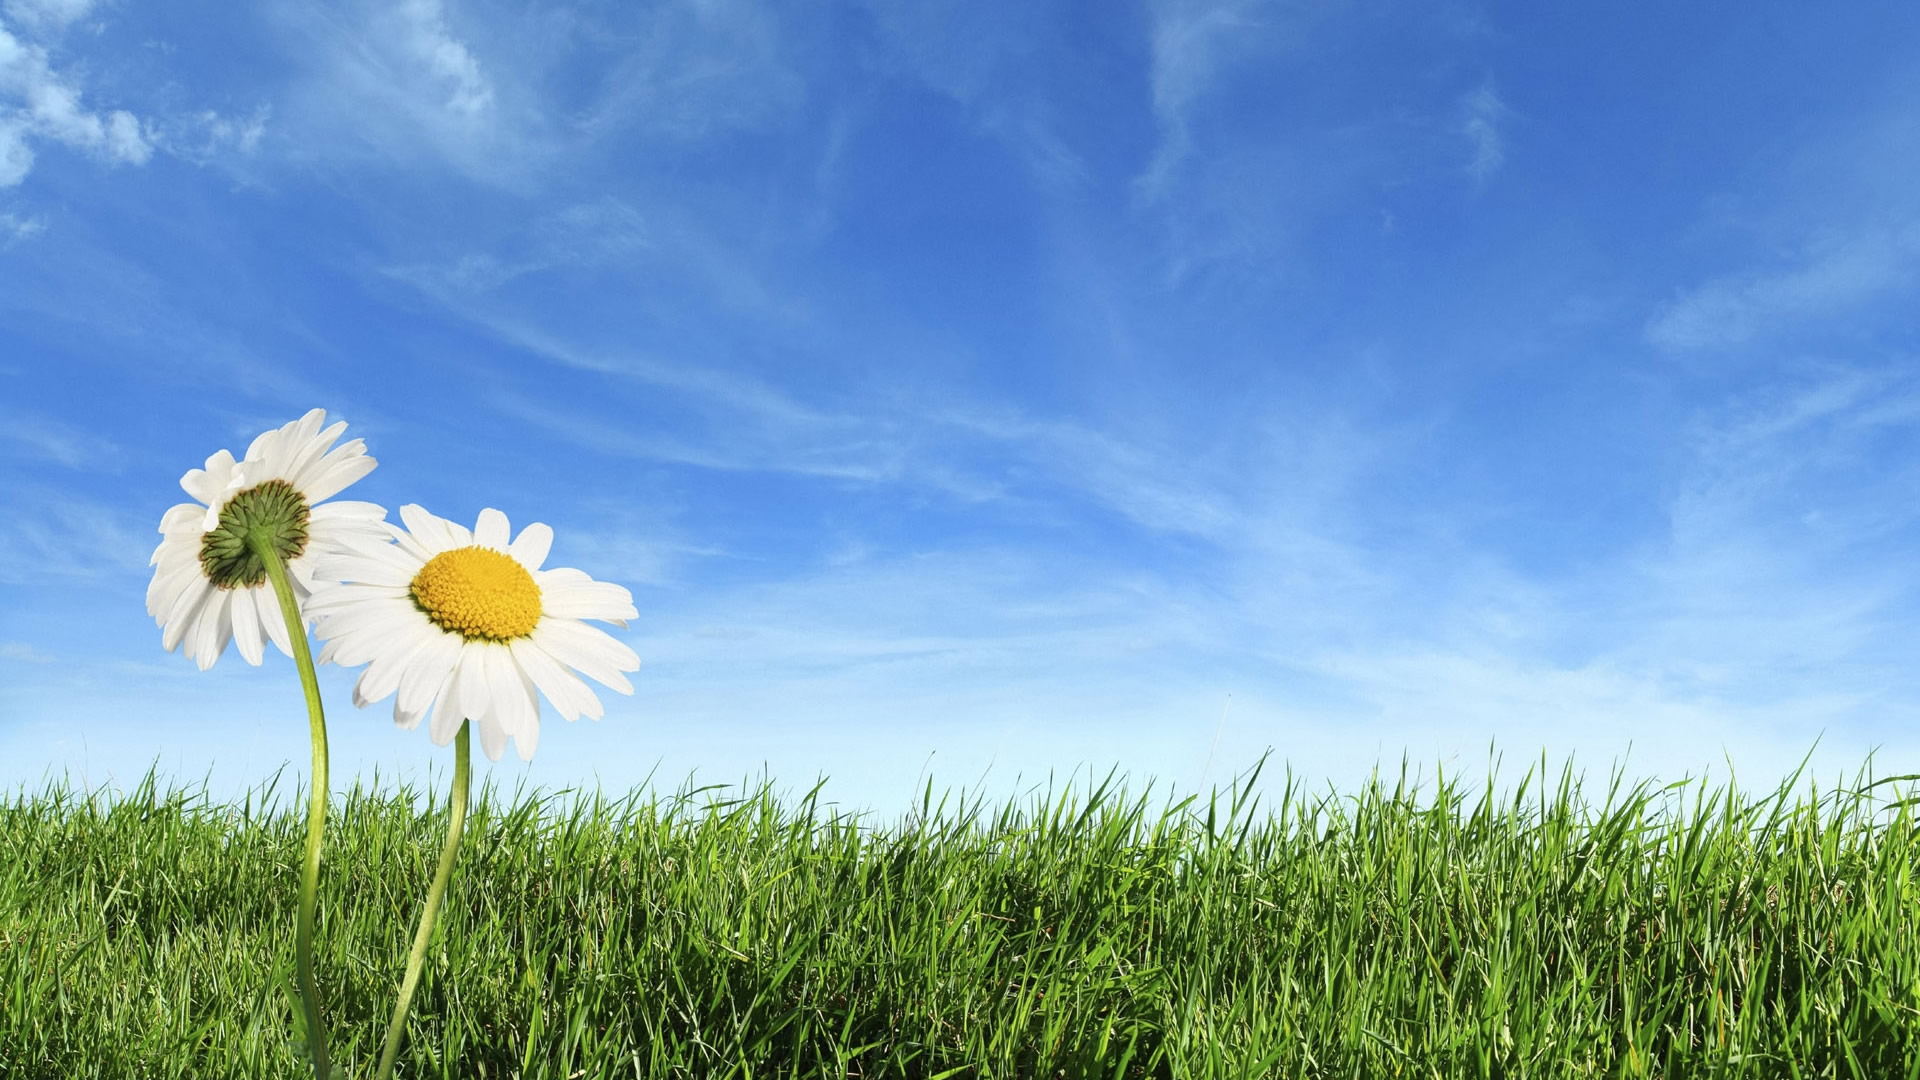 springtime wallpapers : Your Wallpaper Images : Free wallpapers ...